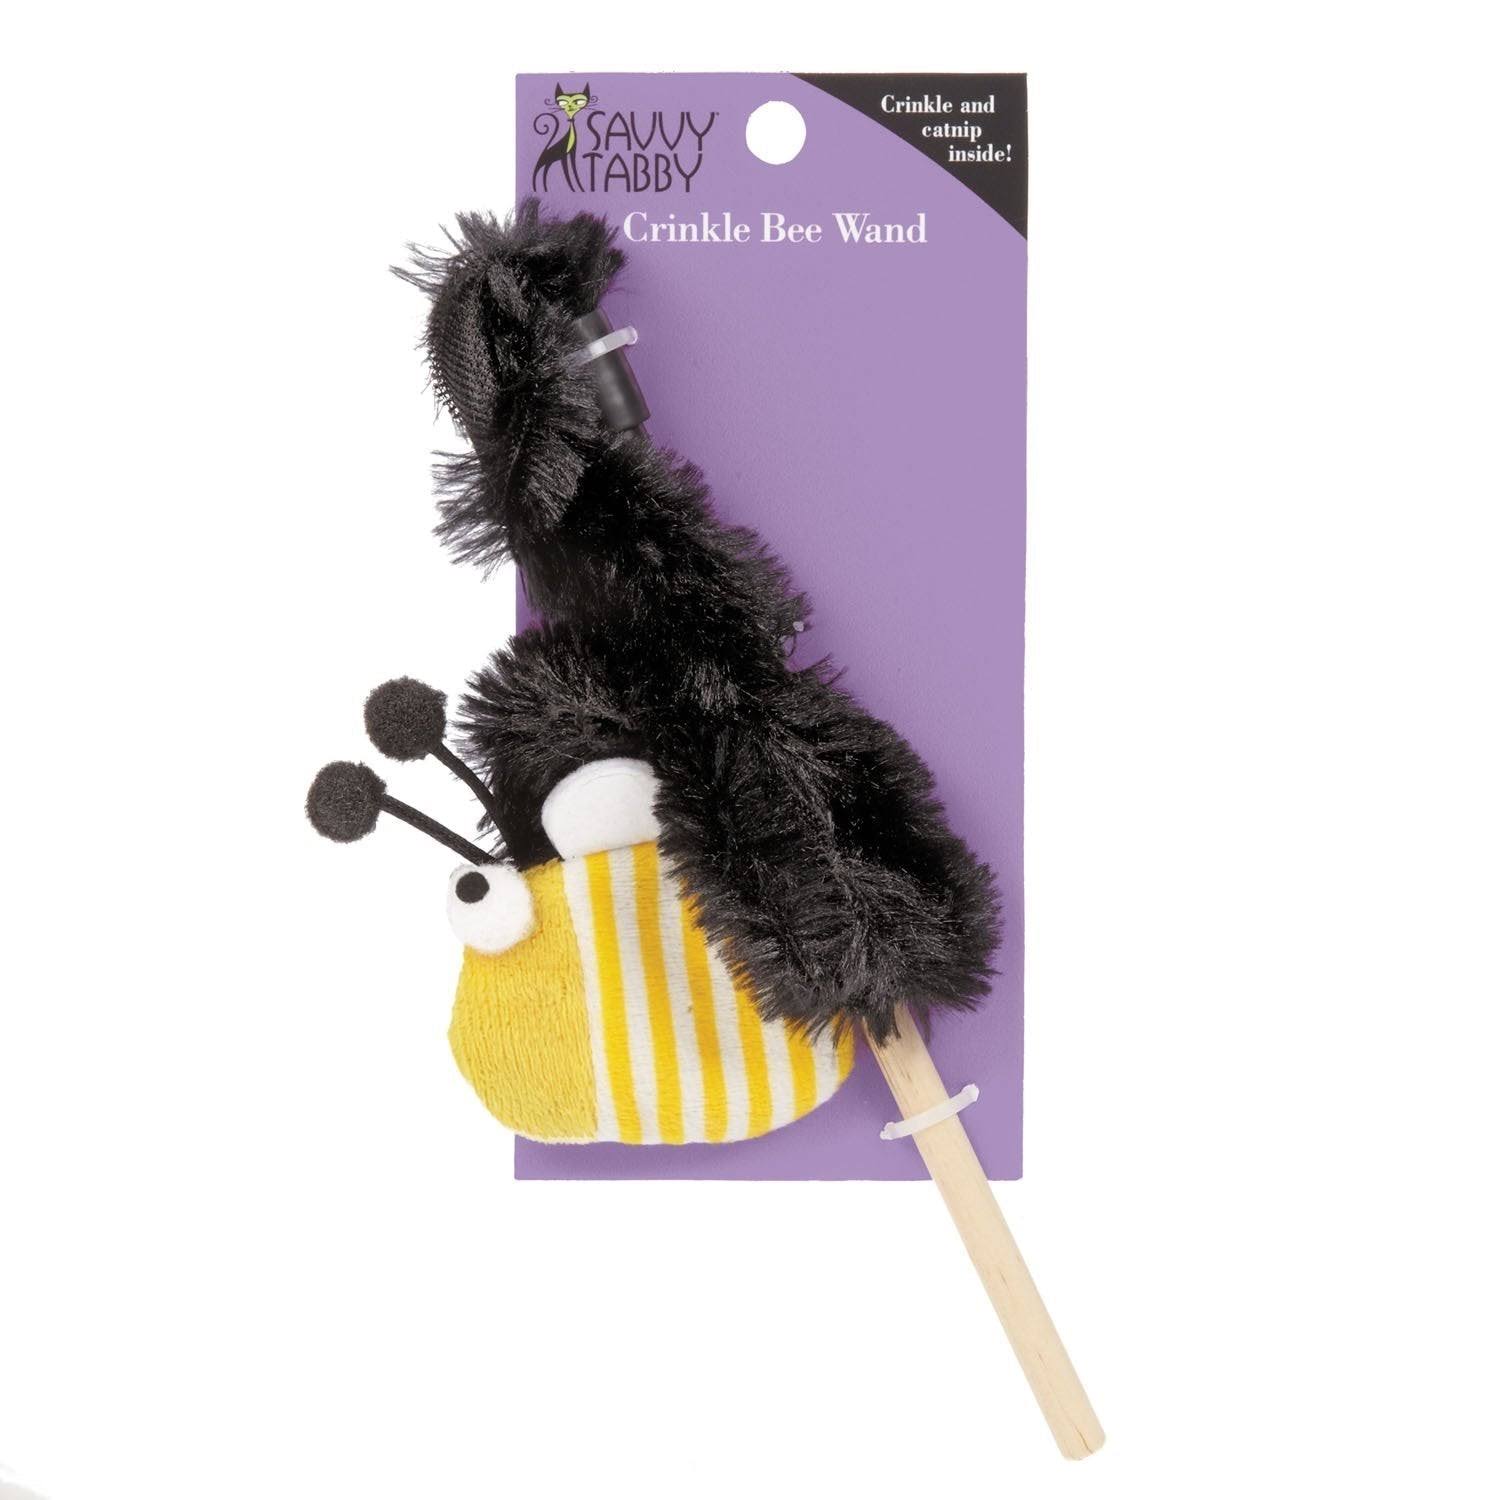 Savvy Tabby Crinkle Bee Cat Toy - Yellow, Wands, 7.5"